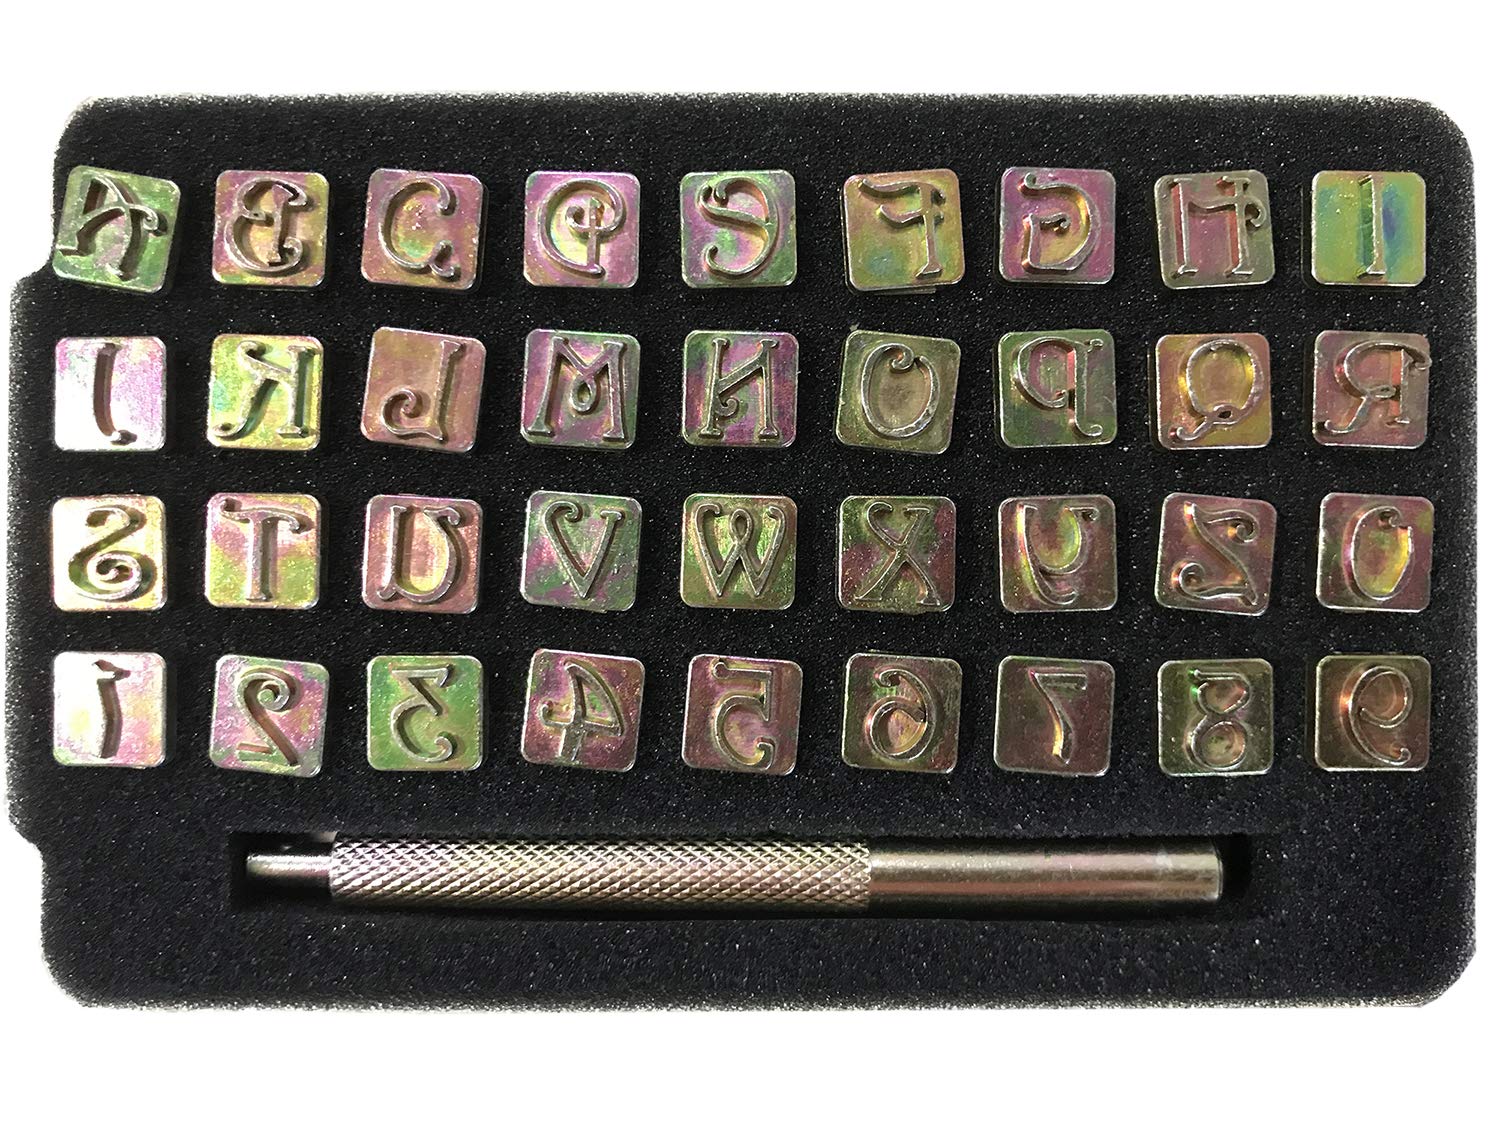 OwnMy Capital Letters Stamp Set 1/2 / 13mm Alphabet Stamp Tools Set Leather Craft Stamping Tools Leather Art Craft Tool (13mm - 27pcs)